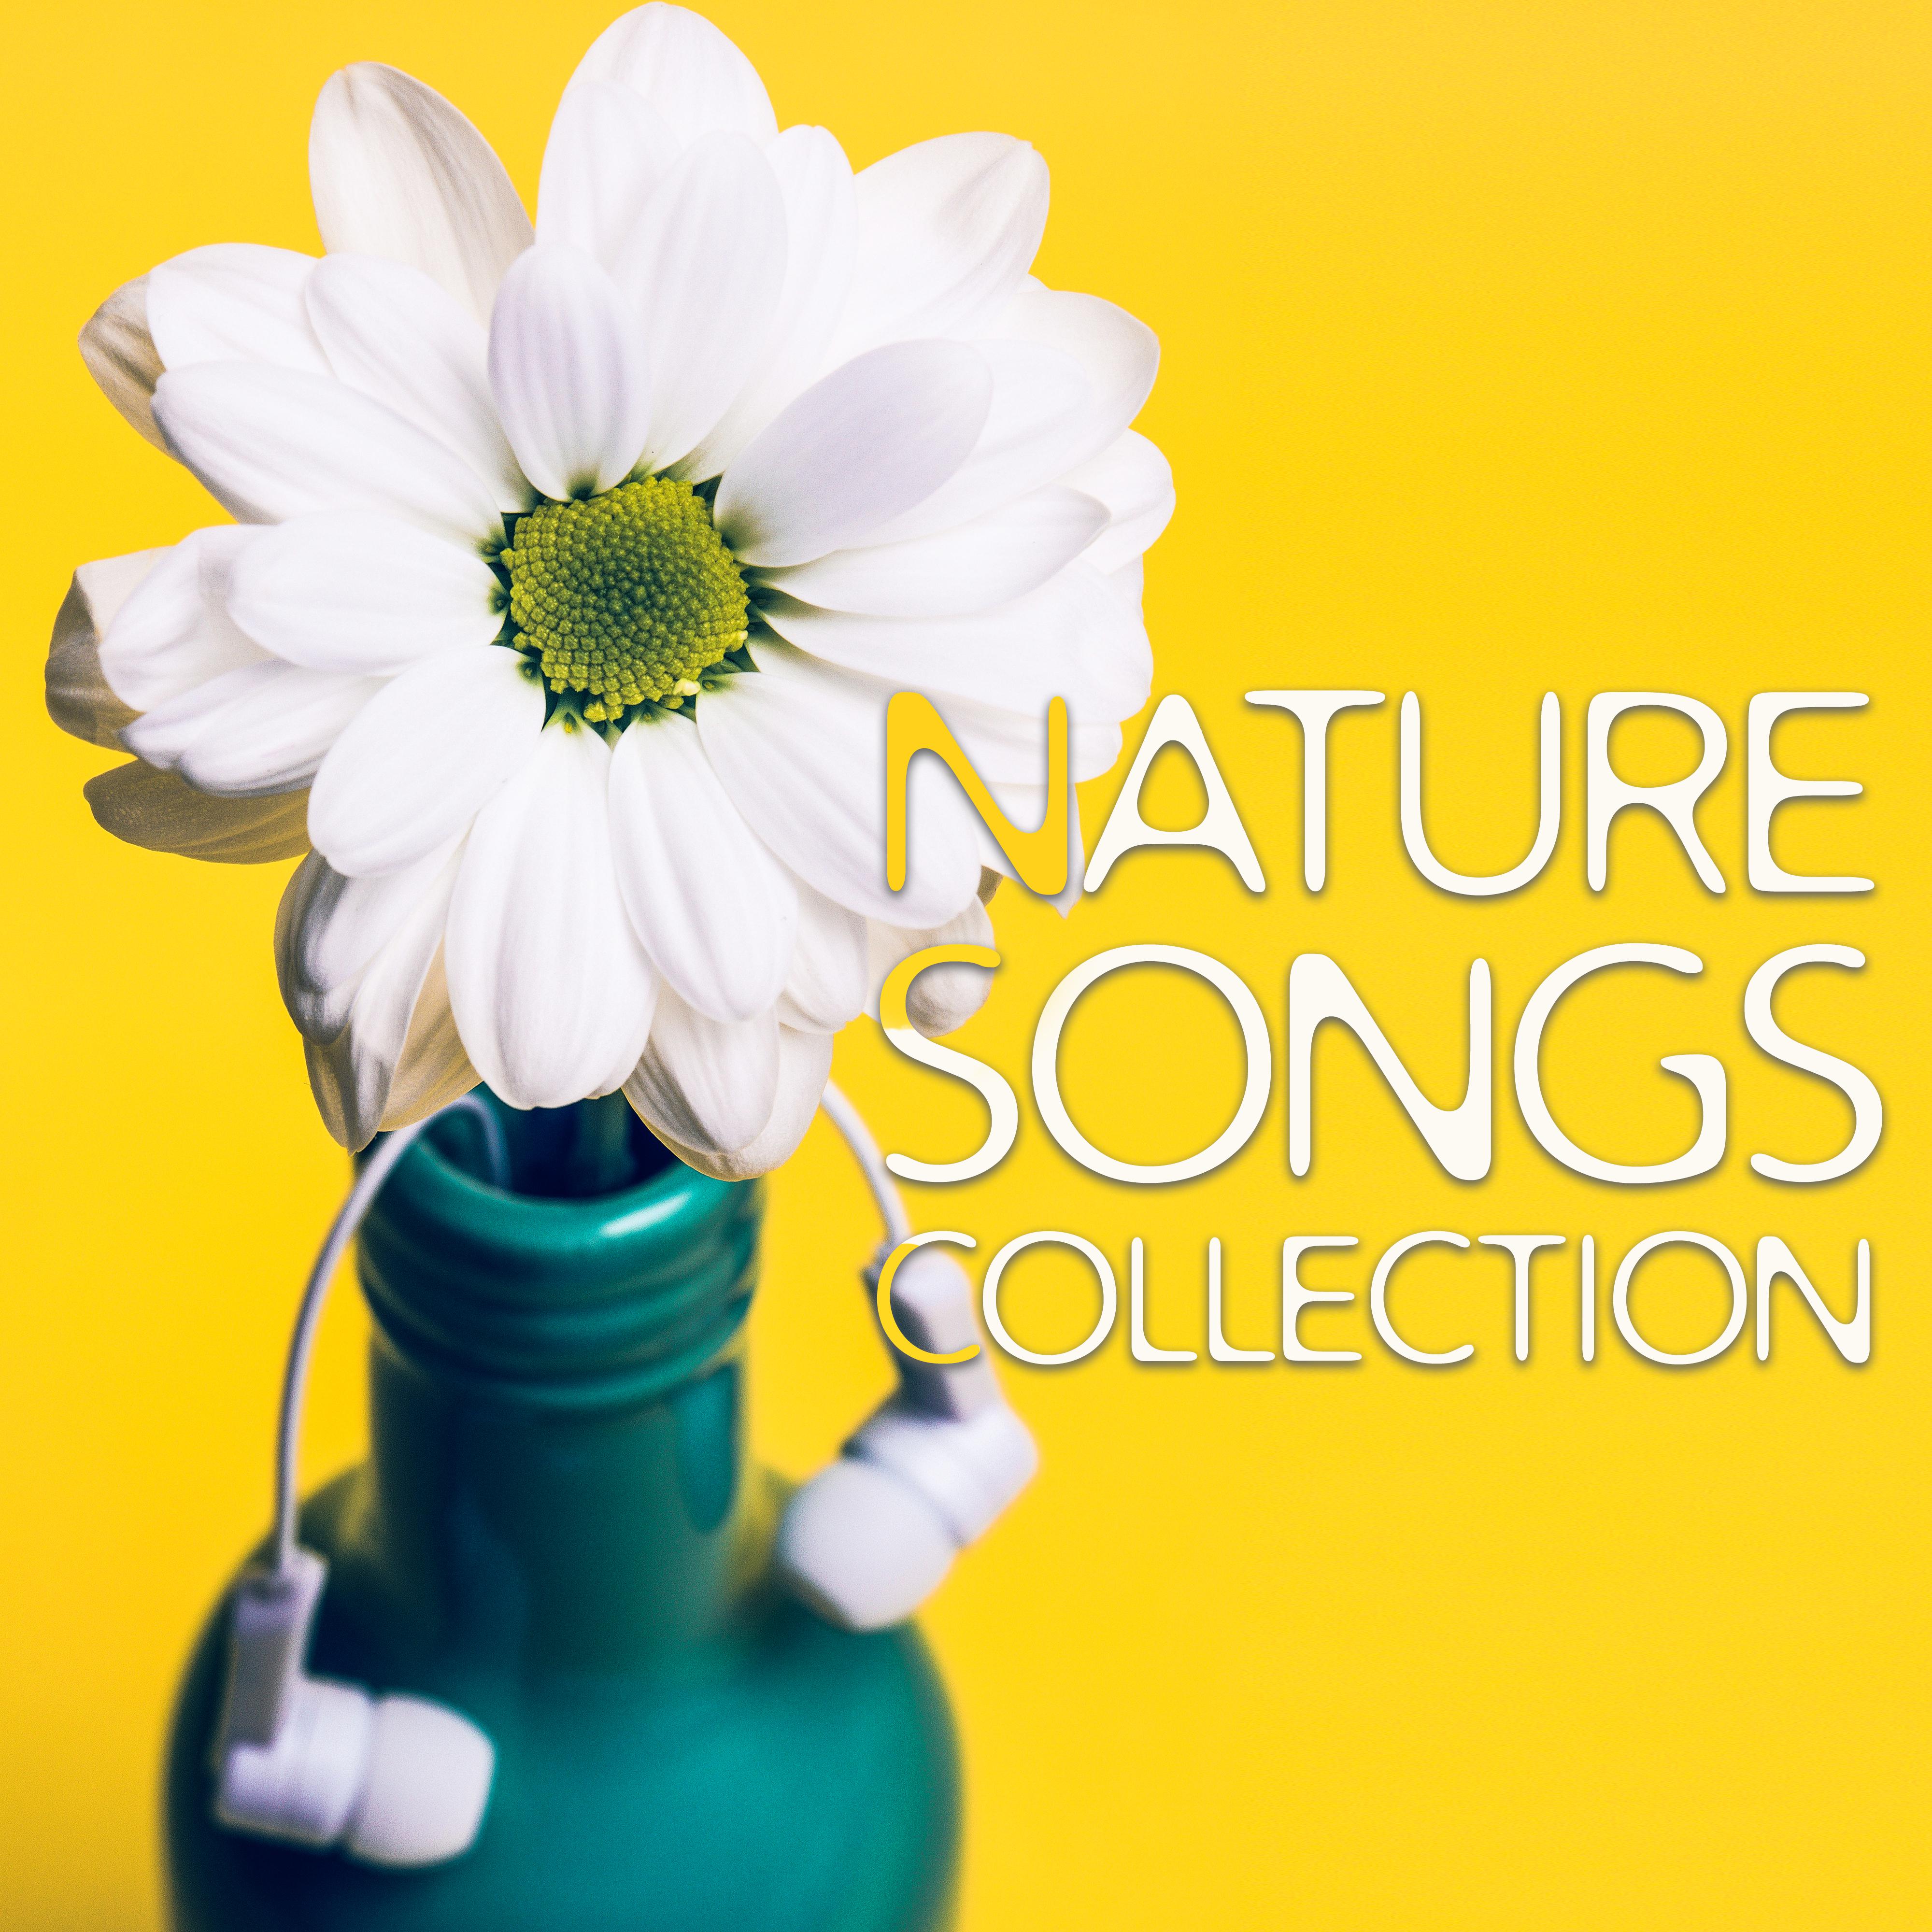 Nature Songs Collection – Relaxing Music,  Massage Therapy, Spa, Wellness, Zen, Bliss, Rest